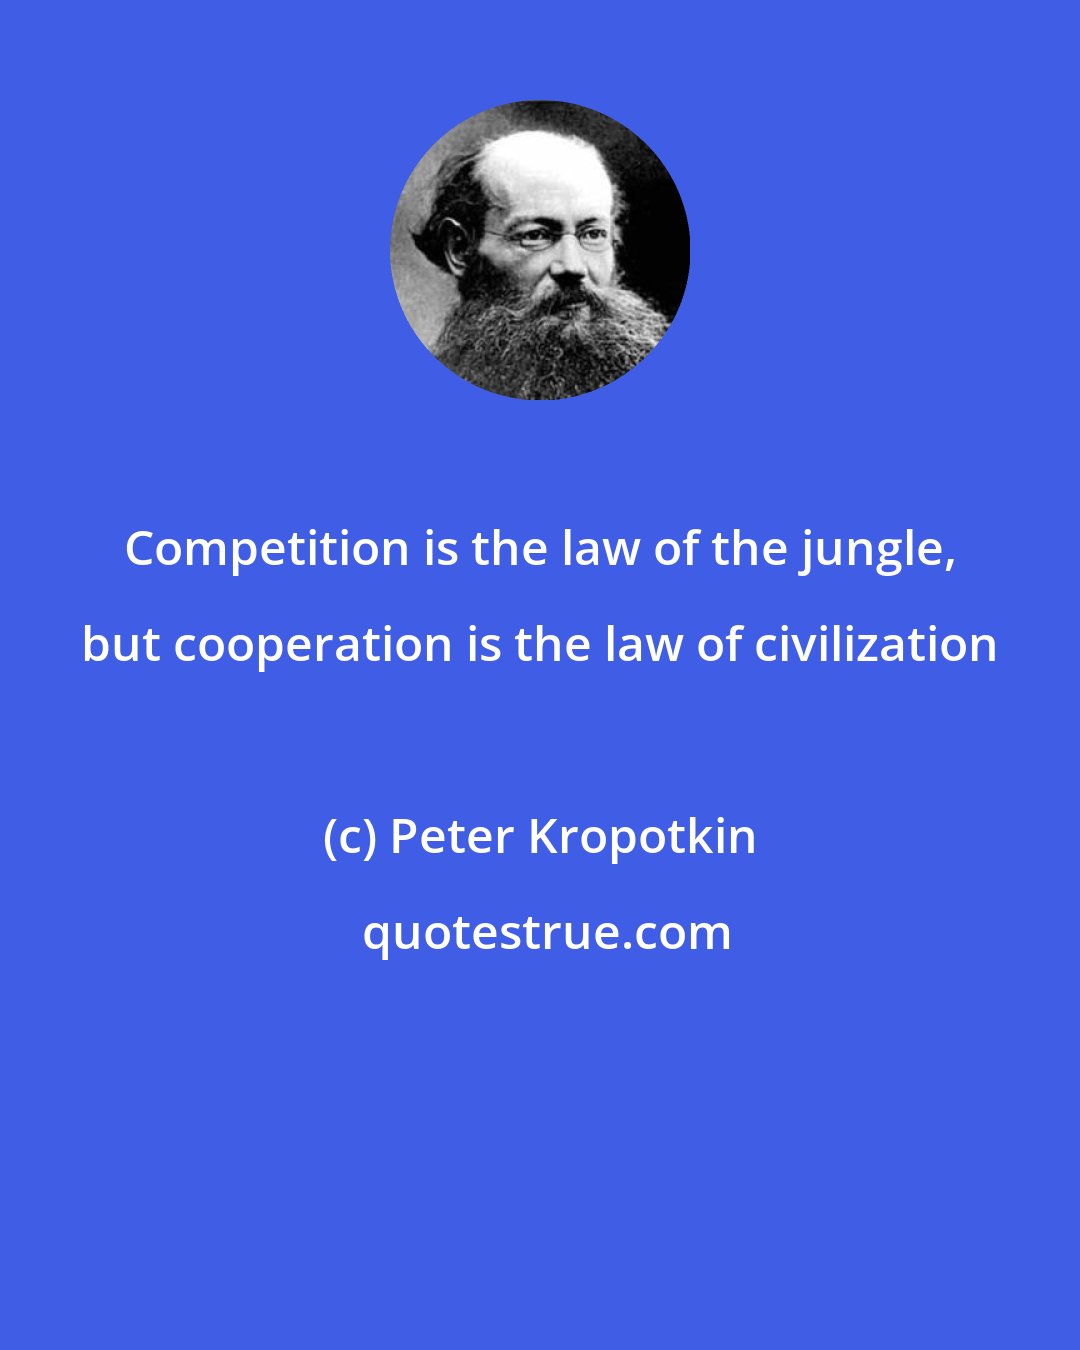 Peter Kropotkin: Competition is the law of the jungle, but cooperation is the law of civilization